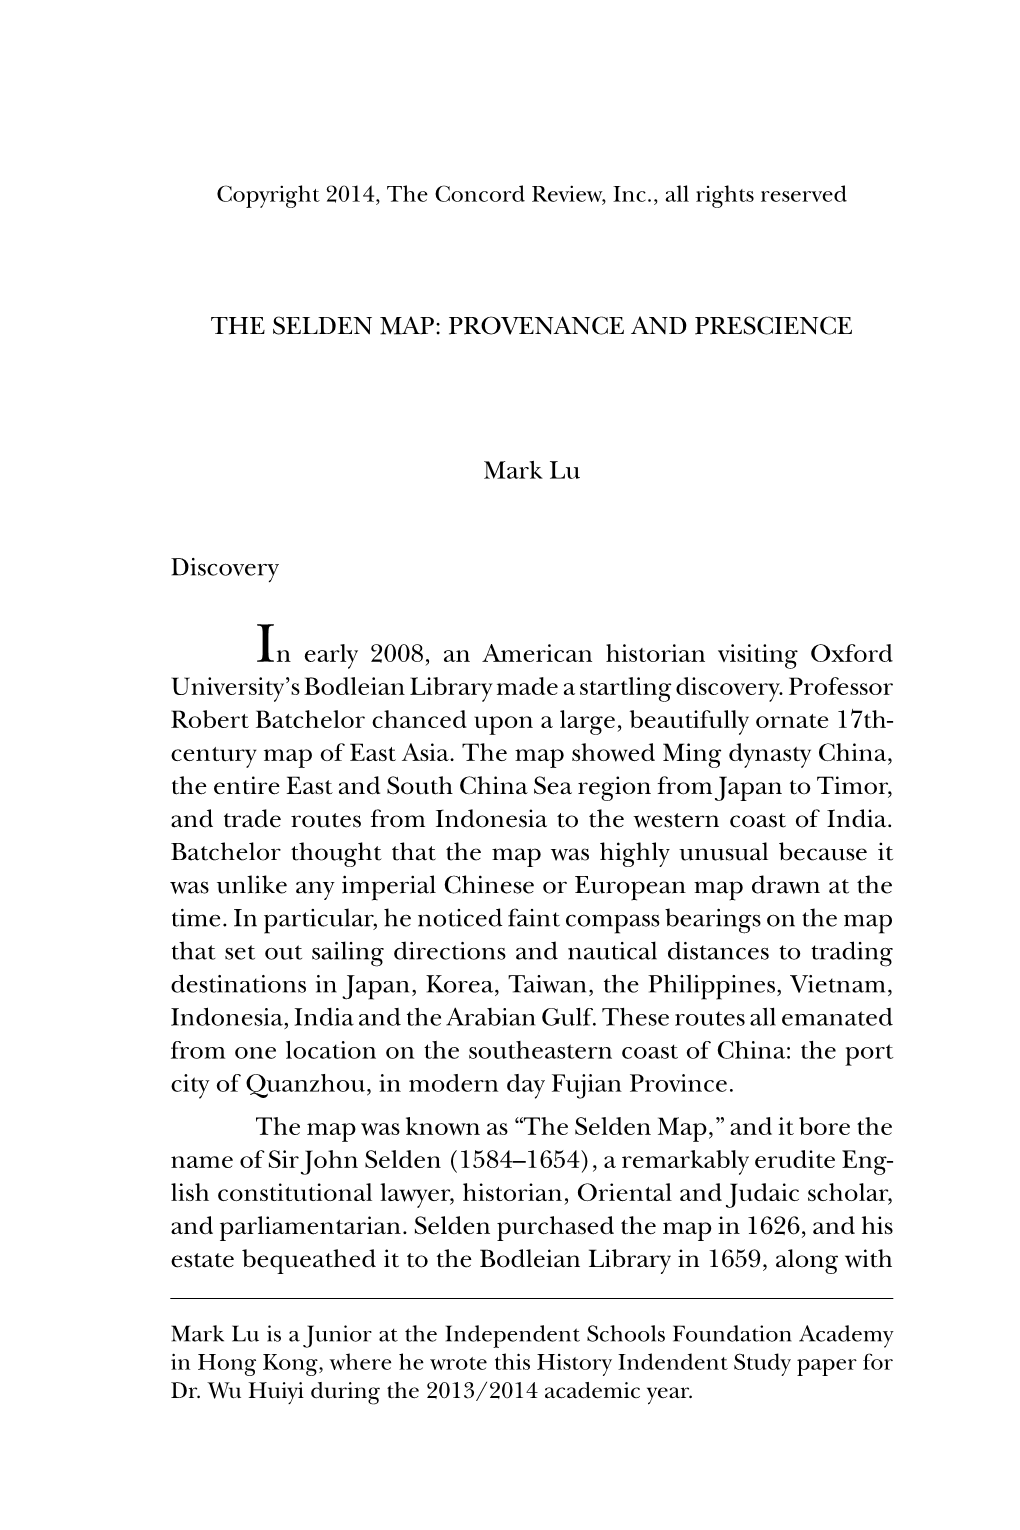 The Selden Map: Provenance and Prescience